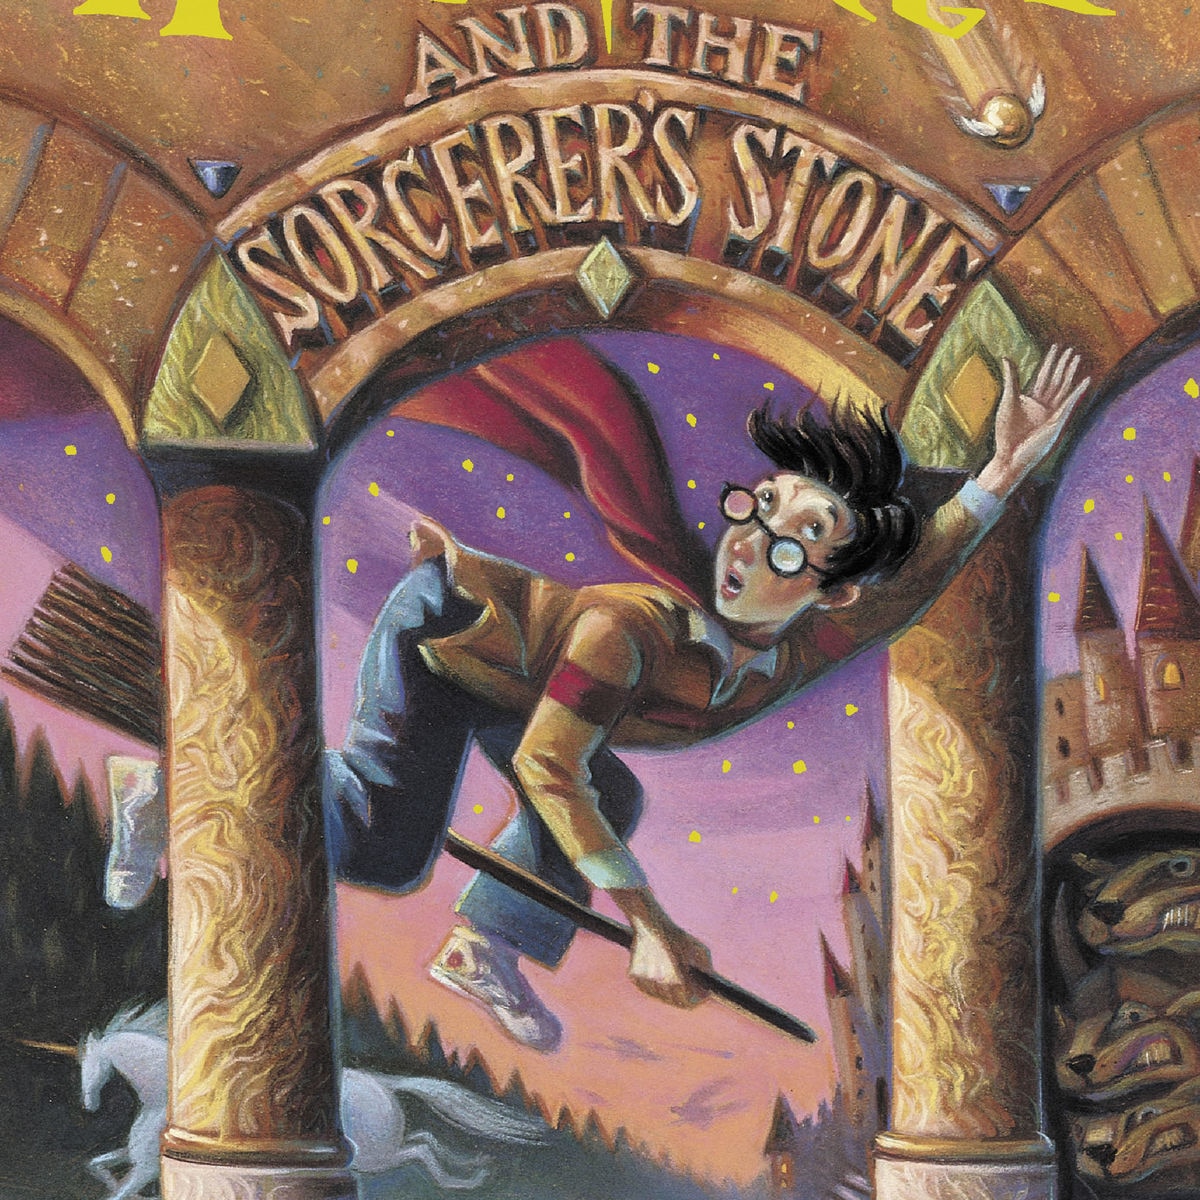 book review about harry potter and the sorcerer's stone